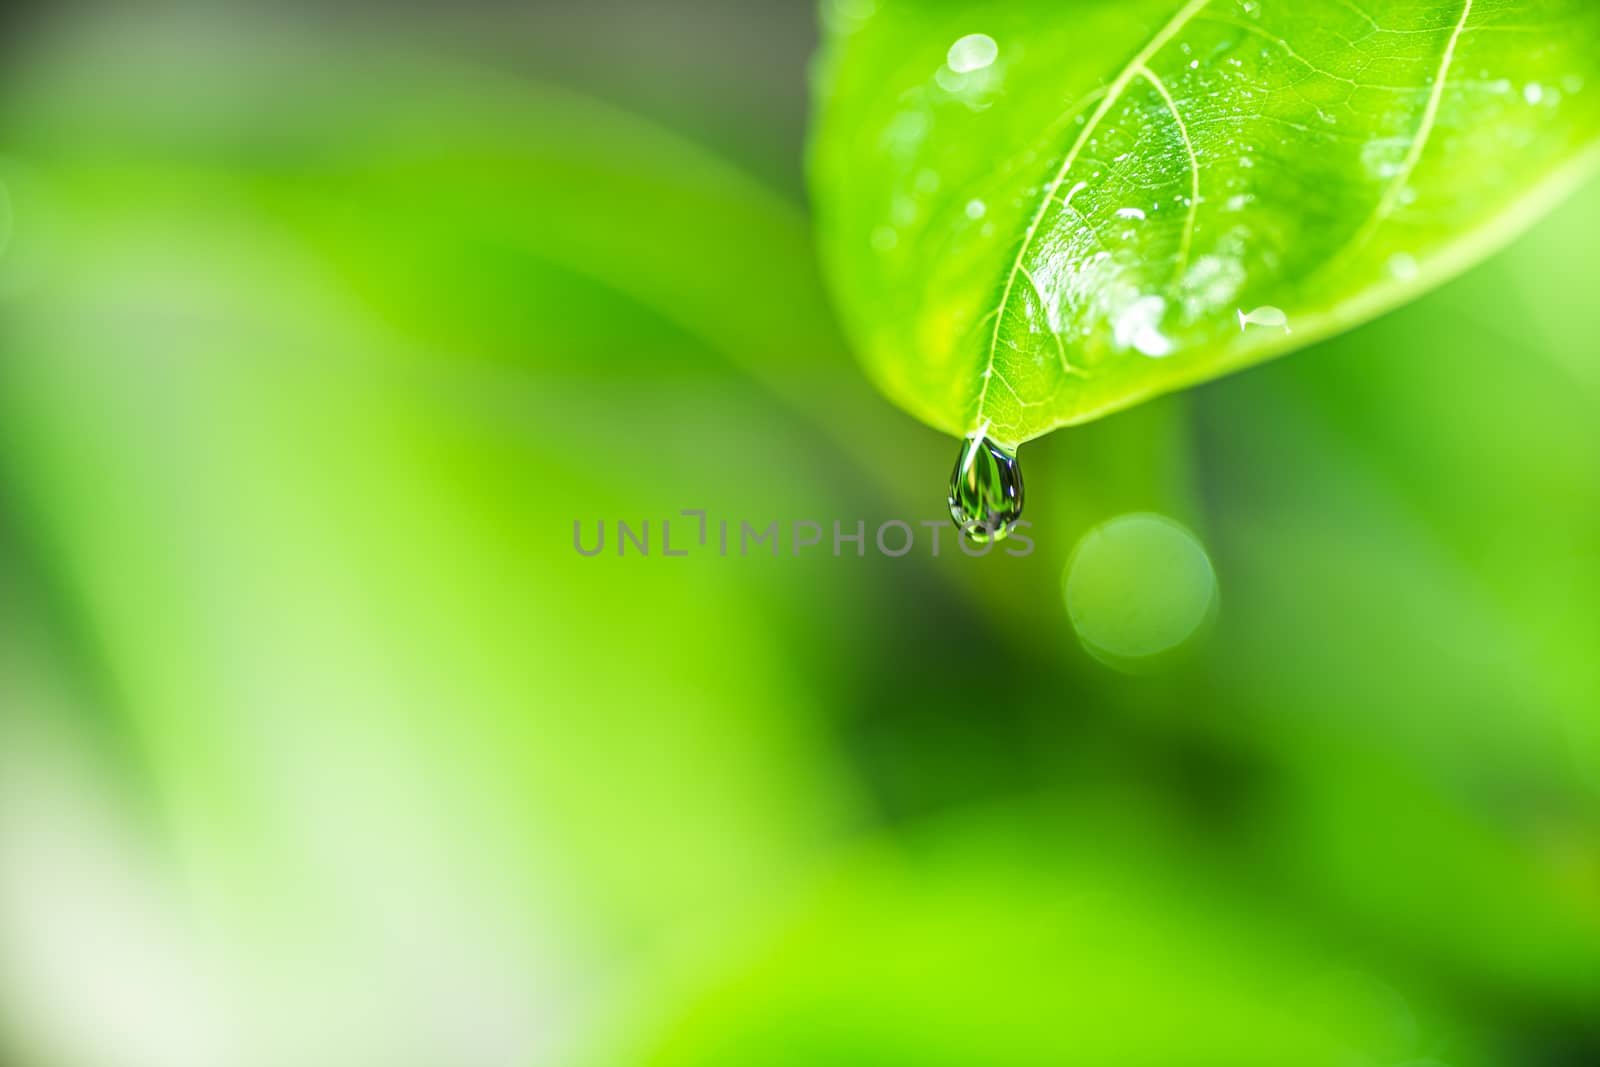 Leaves close up nature view of green leaf on blurred greenery background in garden Use as background image for pasting text or characters